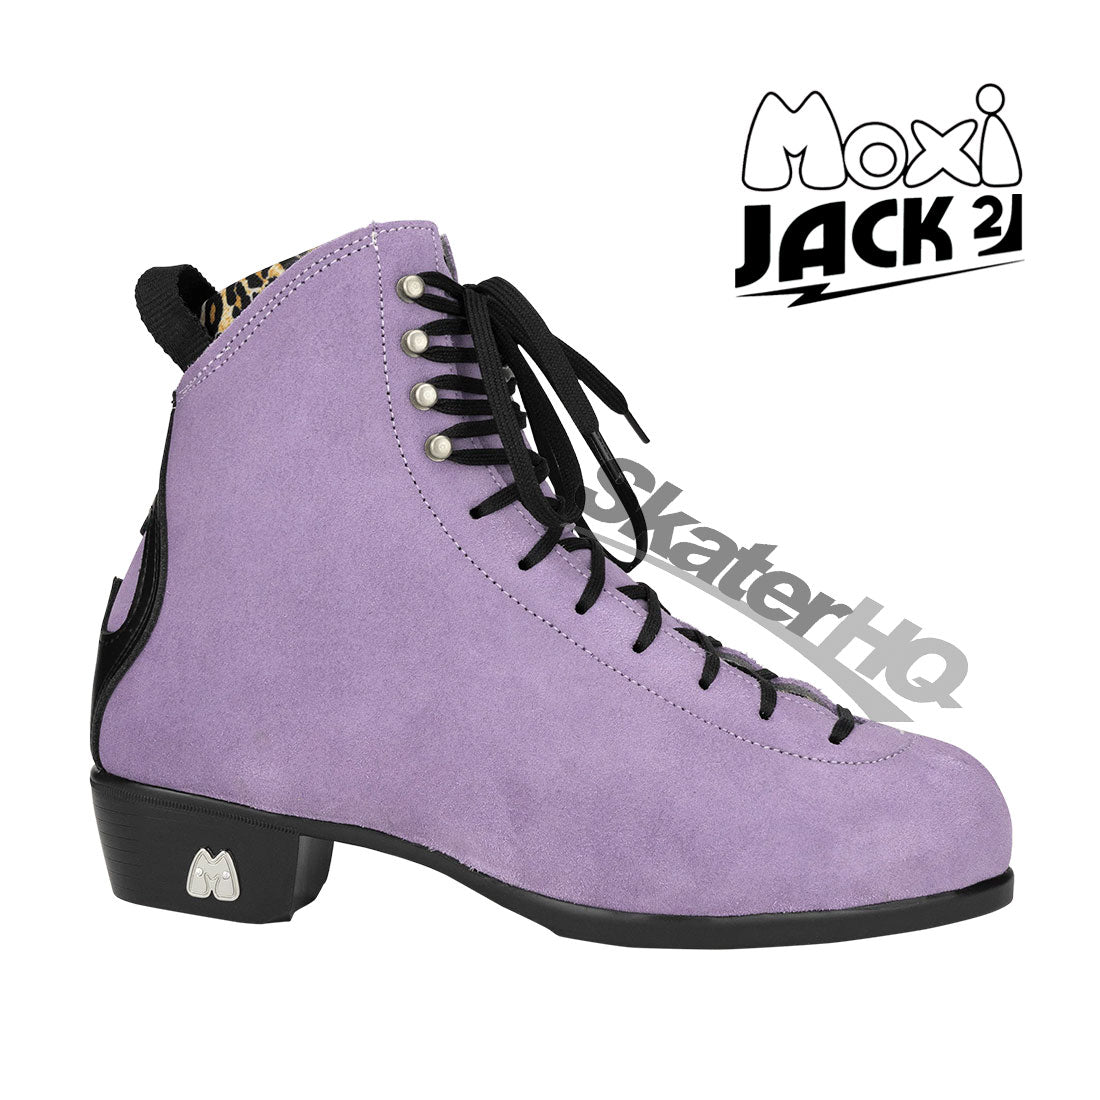 Moxi Jack 2 Boot - Lilac Roller Skate Boots